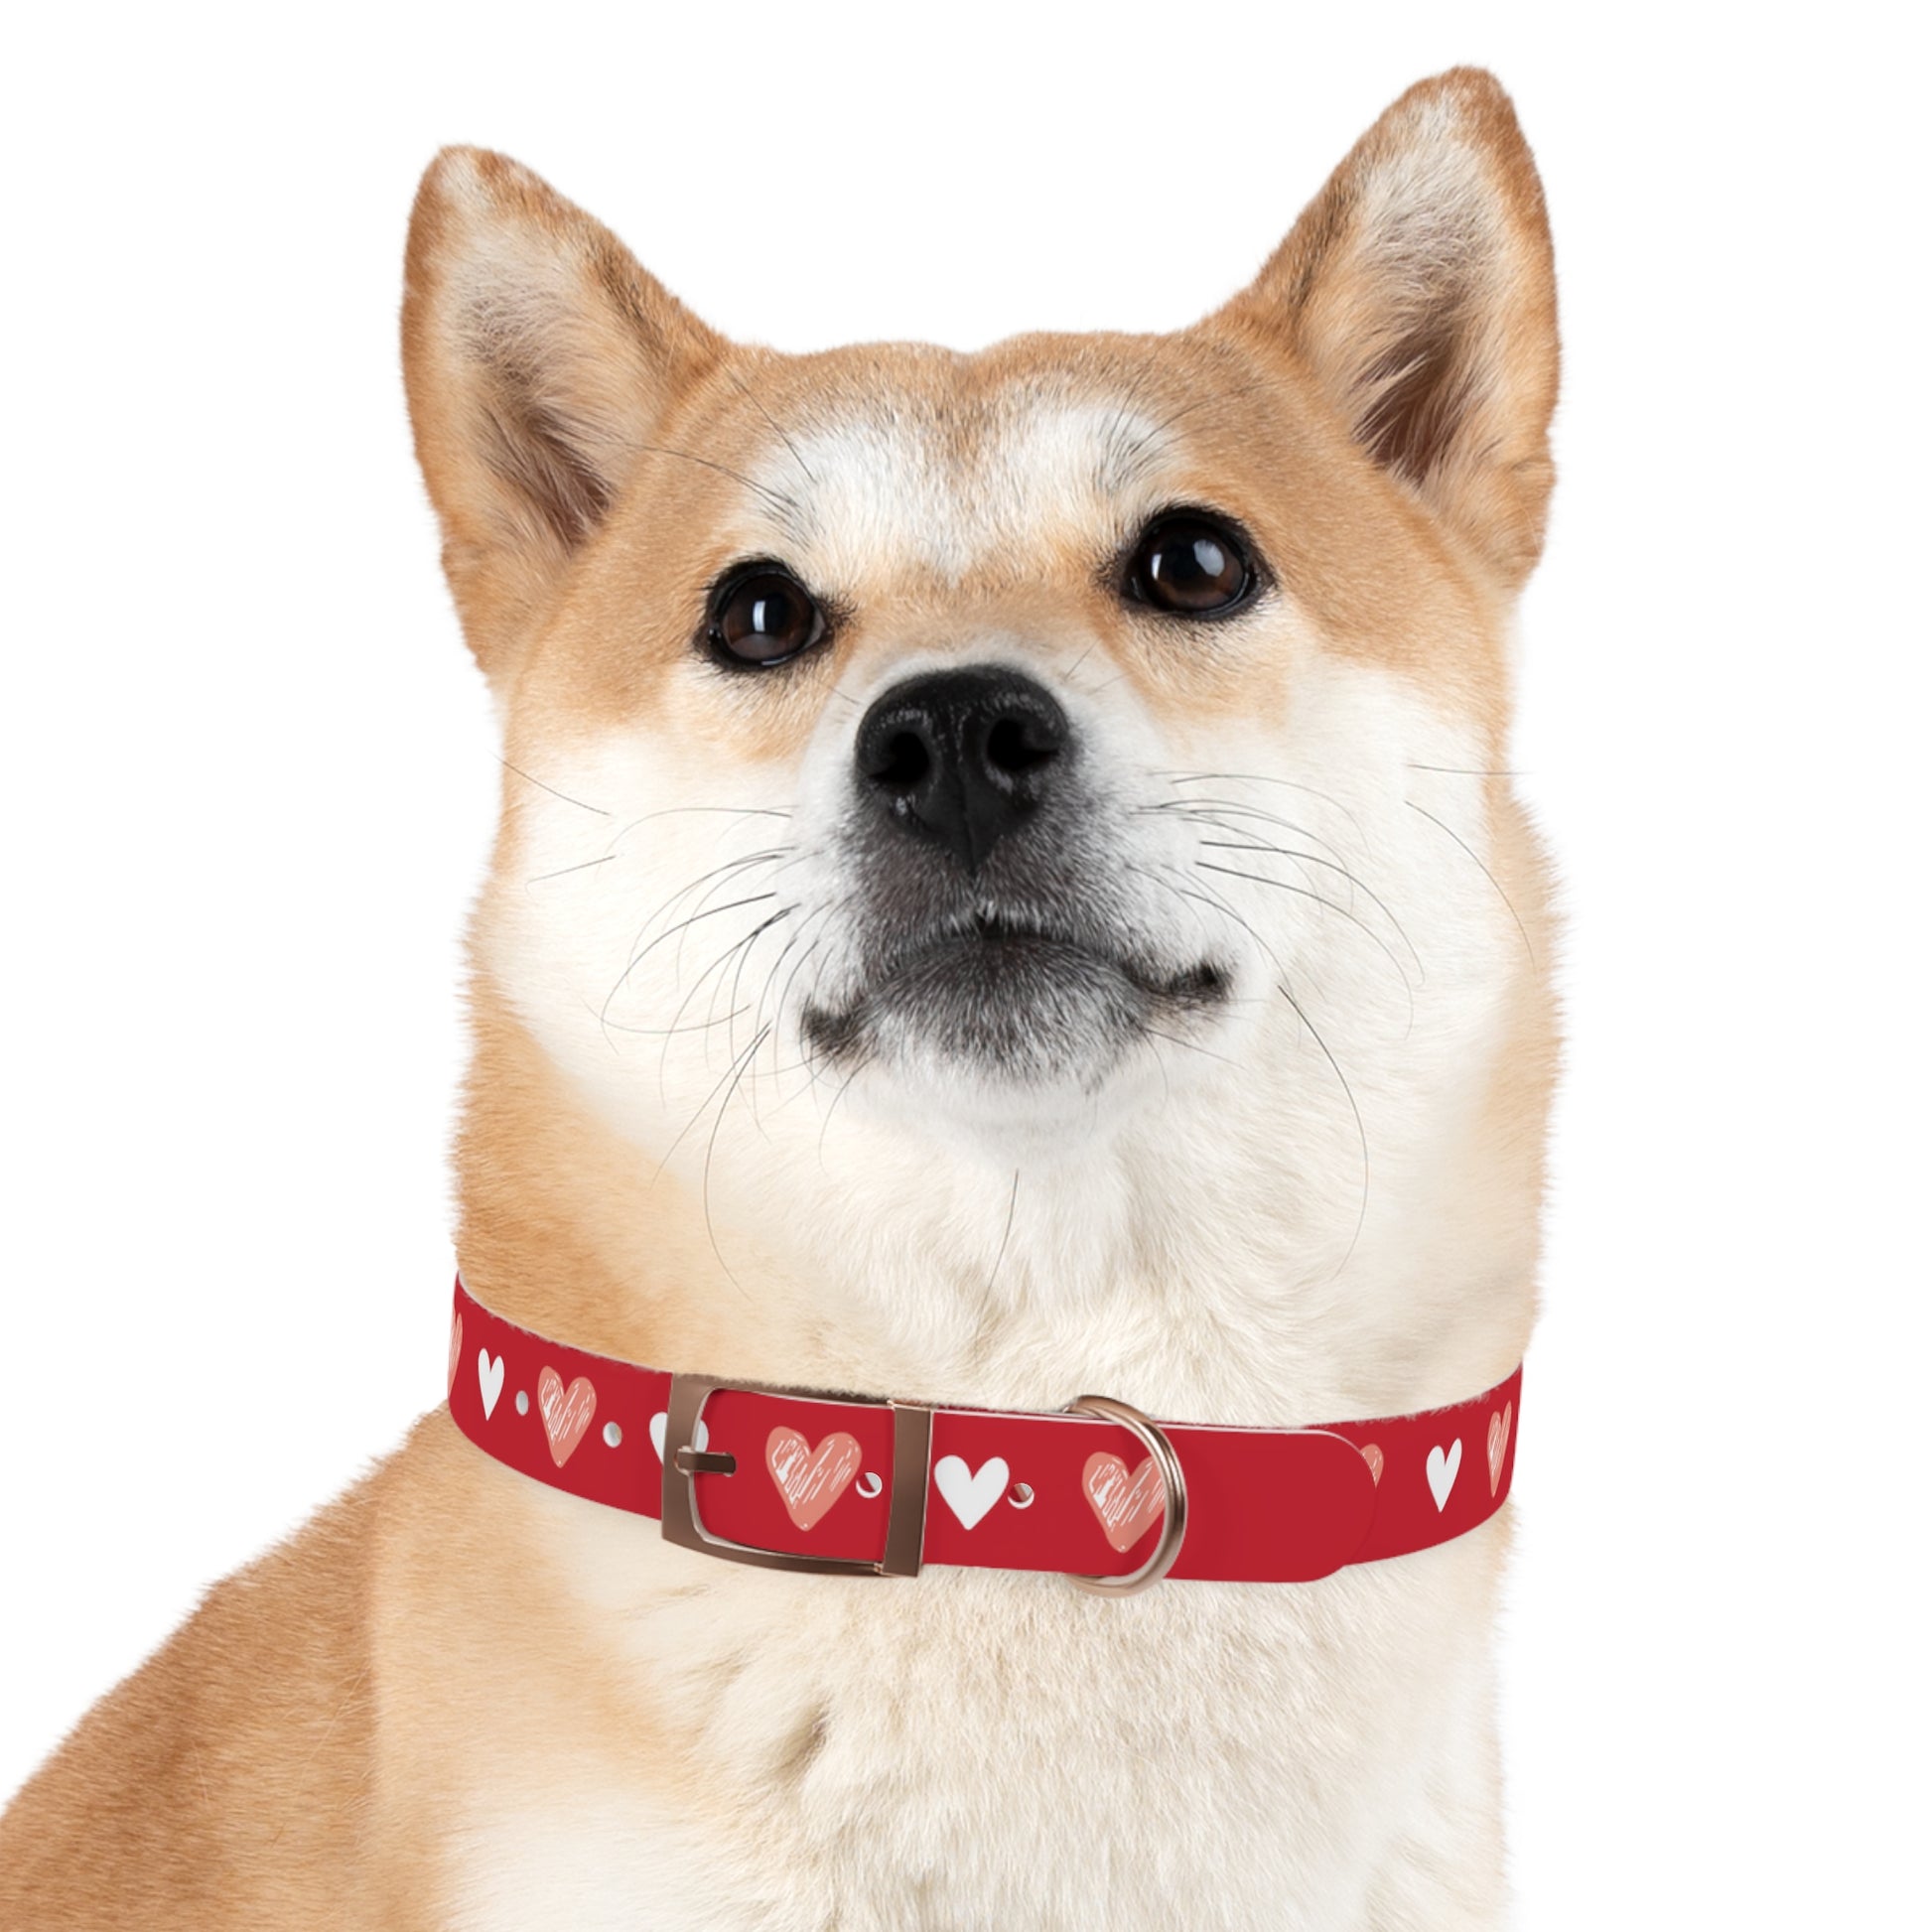 a cute dog wearing a collar with a beautiful hearts pattern design and the dog's name in the middle of the collar. The color of the dog collar is red